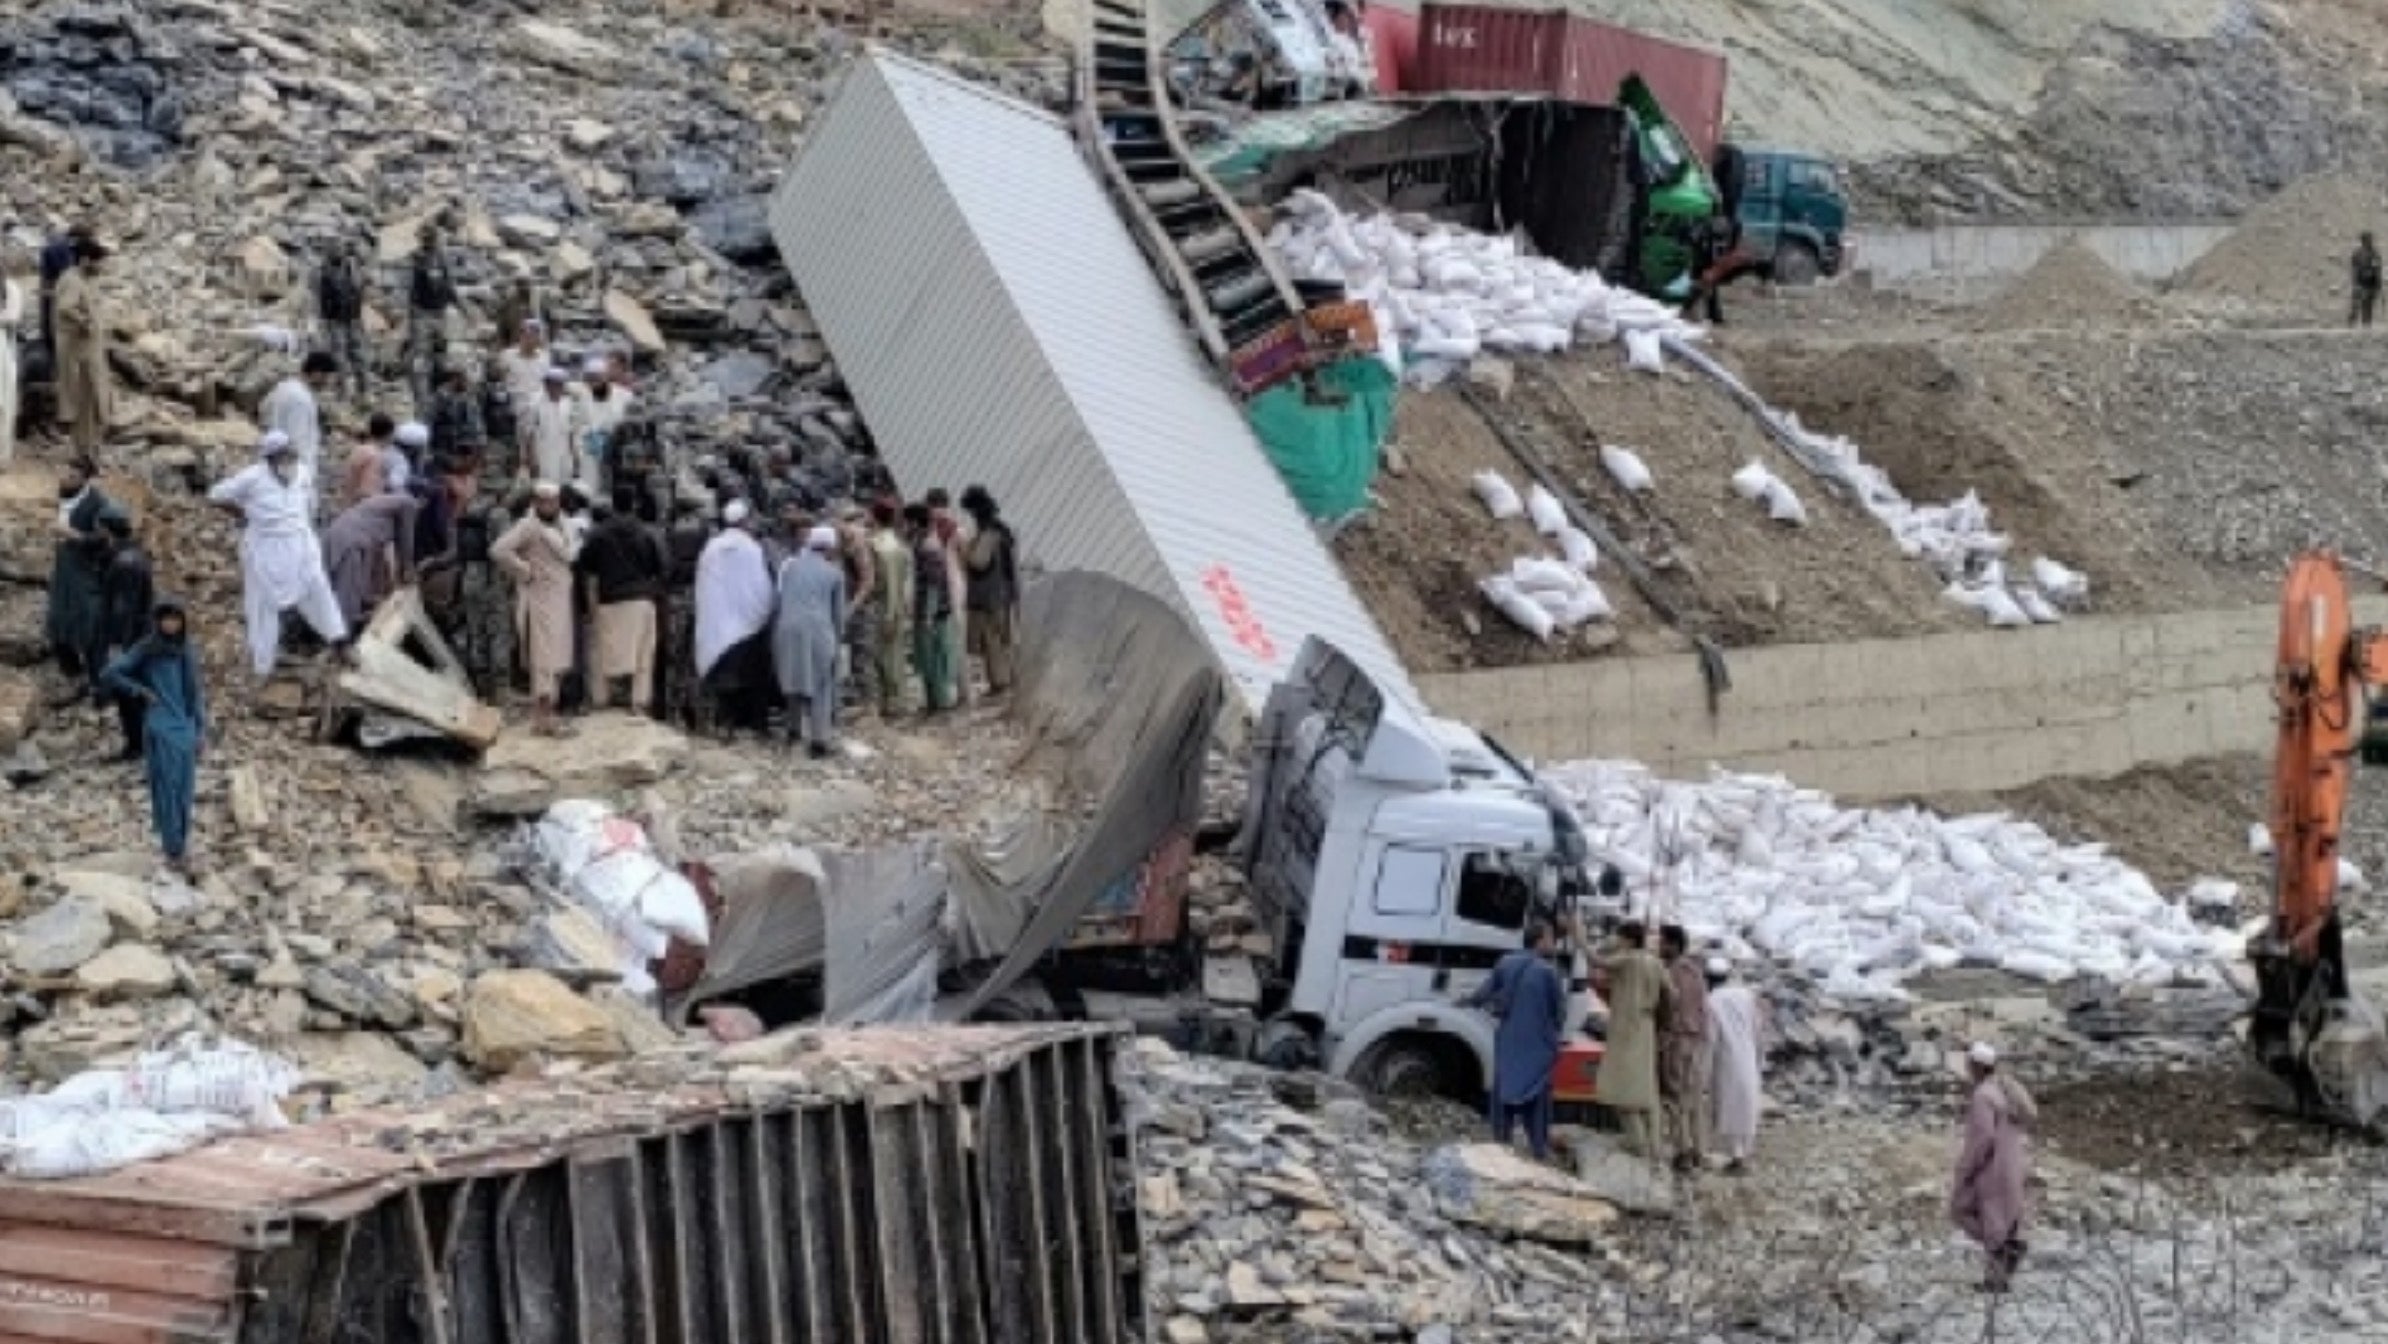 At least 2 dead and 8 injured in a landslide on the Pakistan-Afghanistan border, Magnate Daily